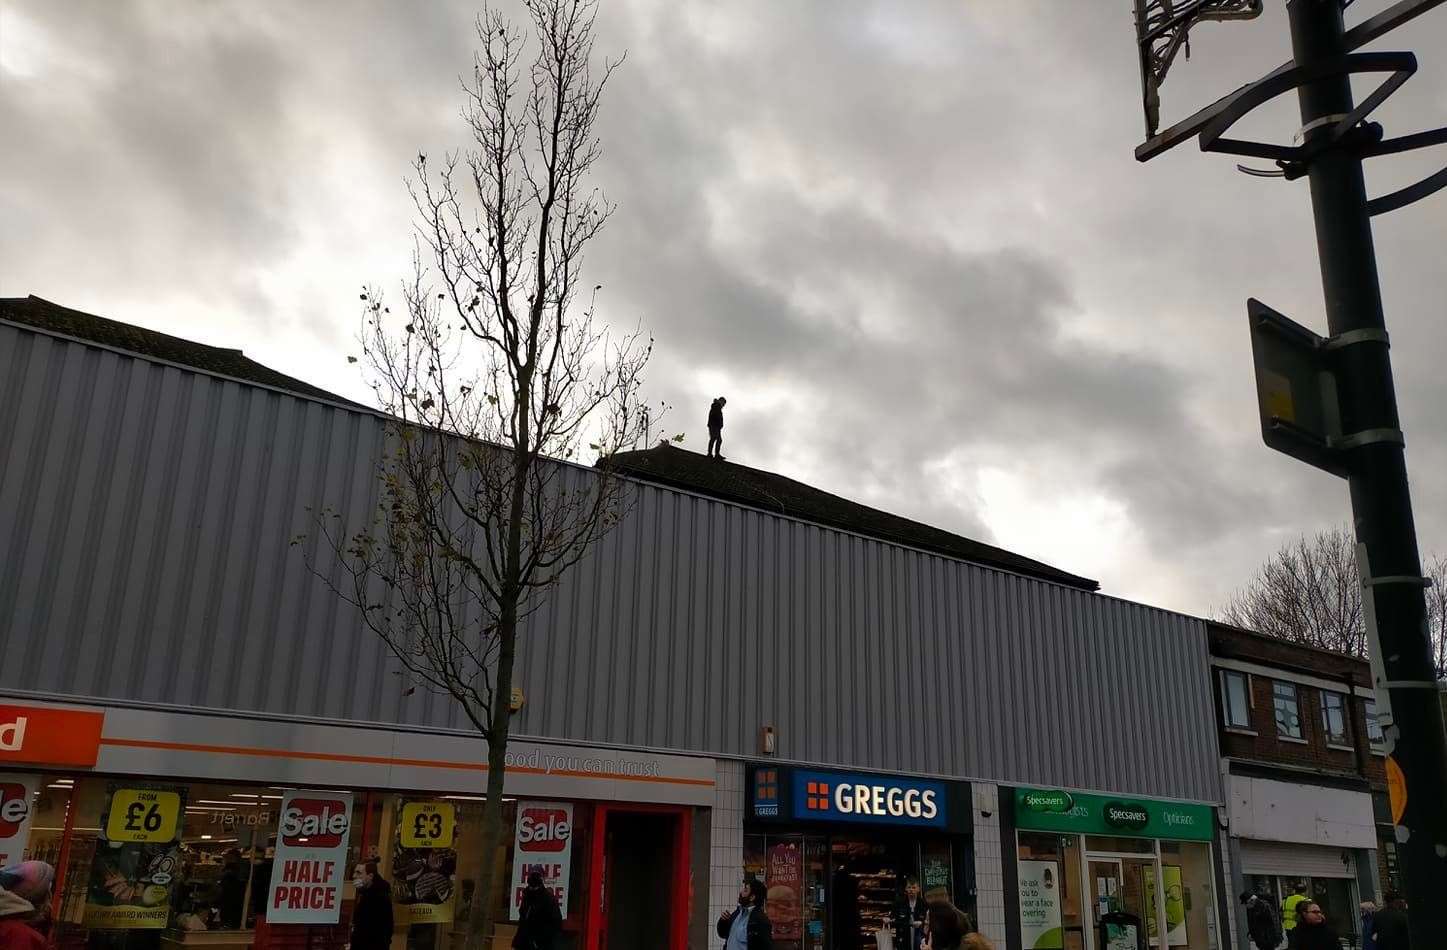 Three teenagers were arrested after climbing rooftops. Picture: James Chespy